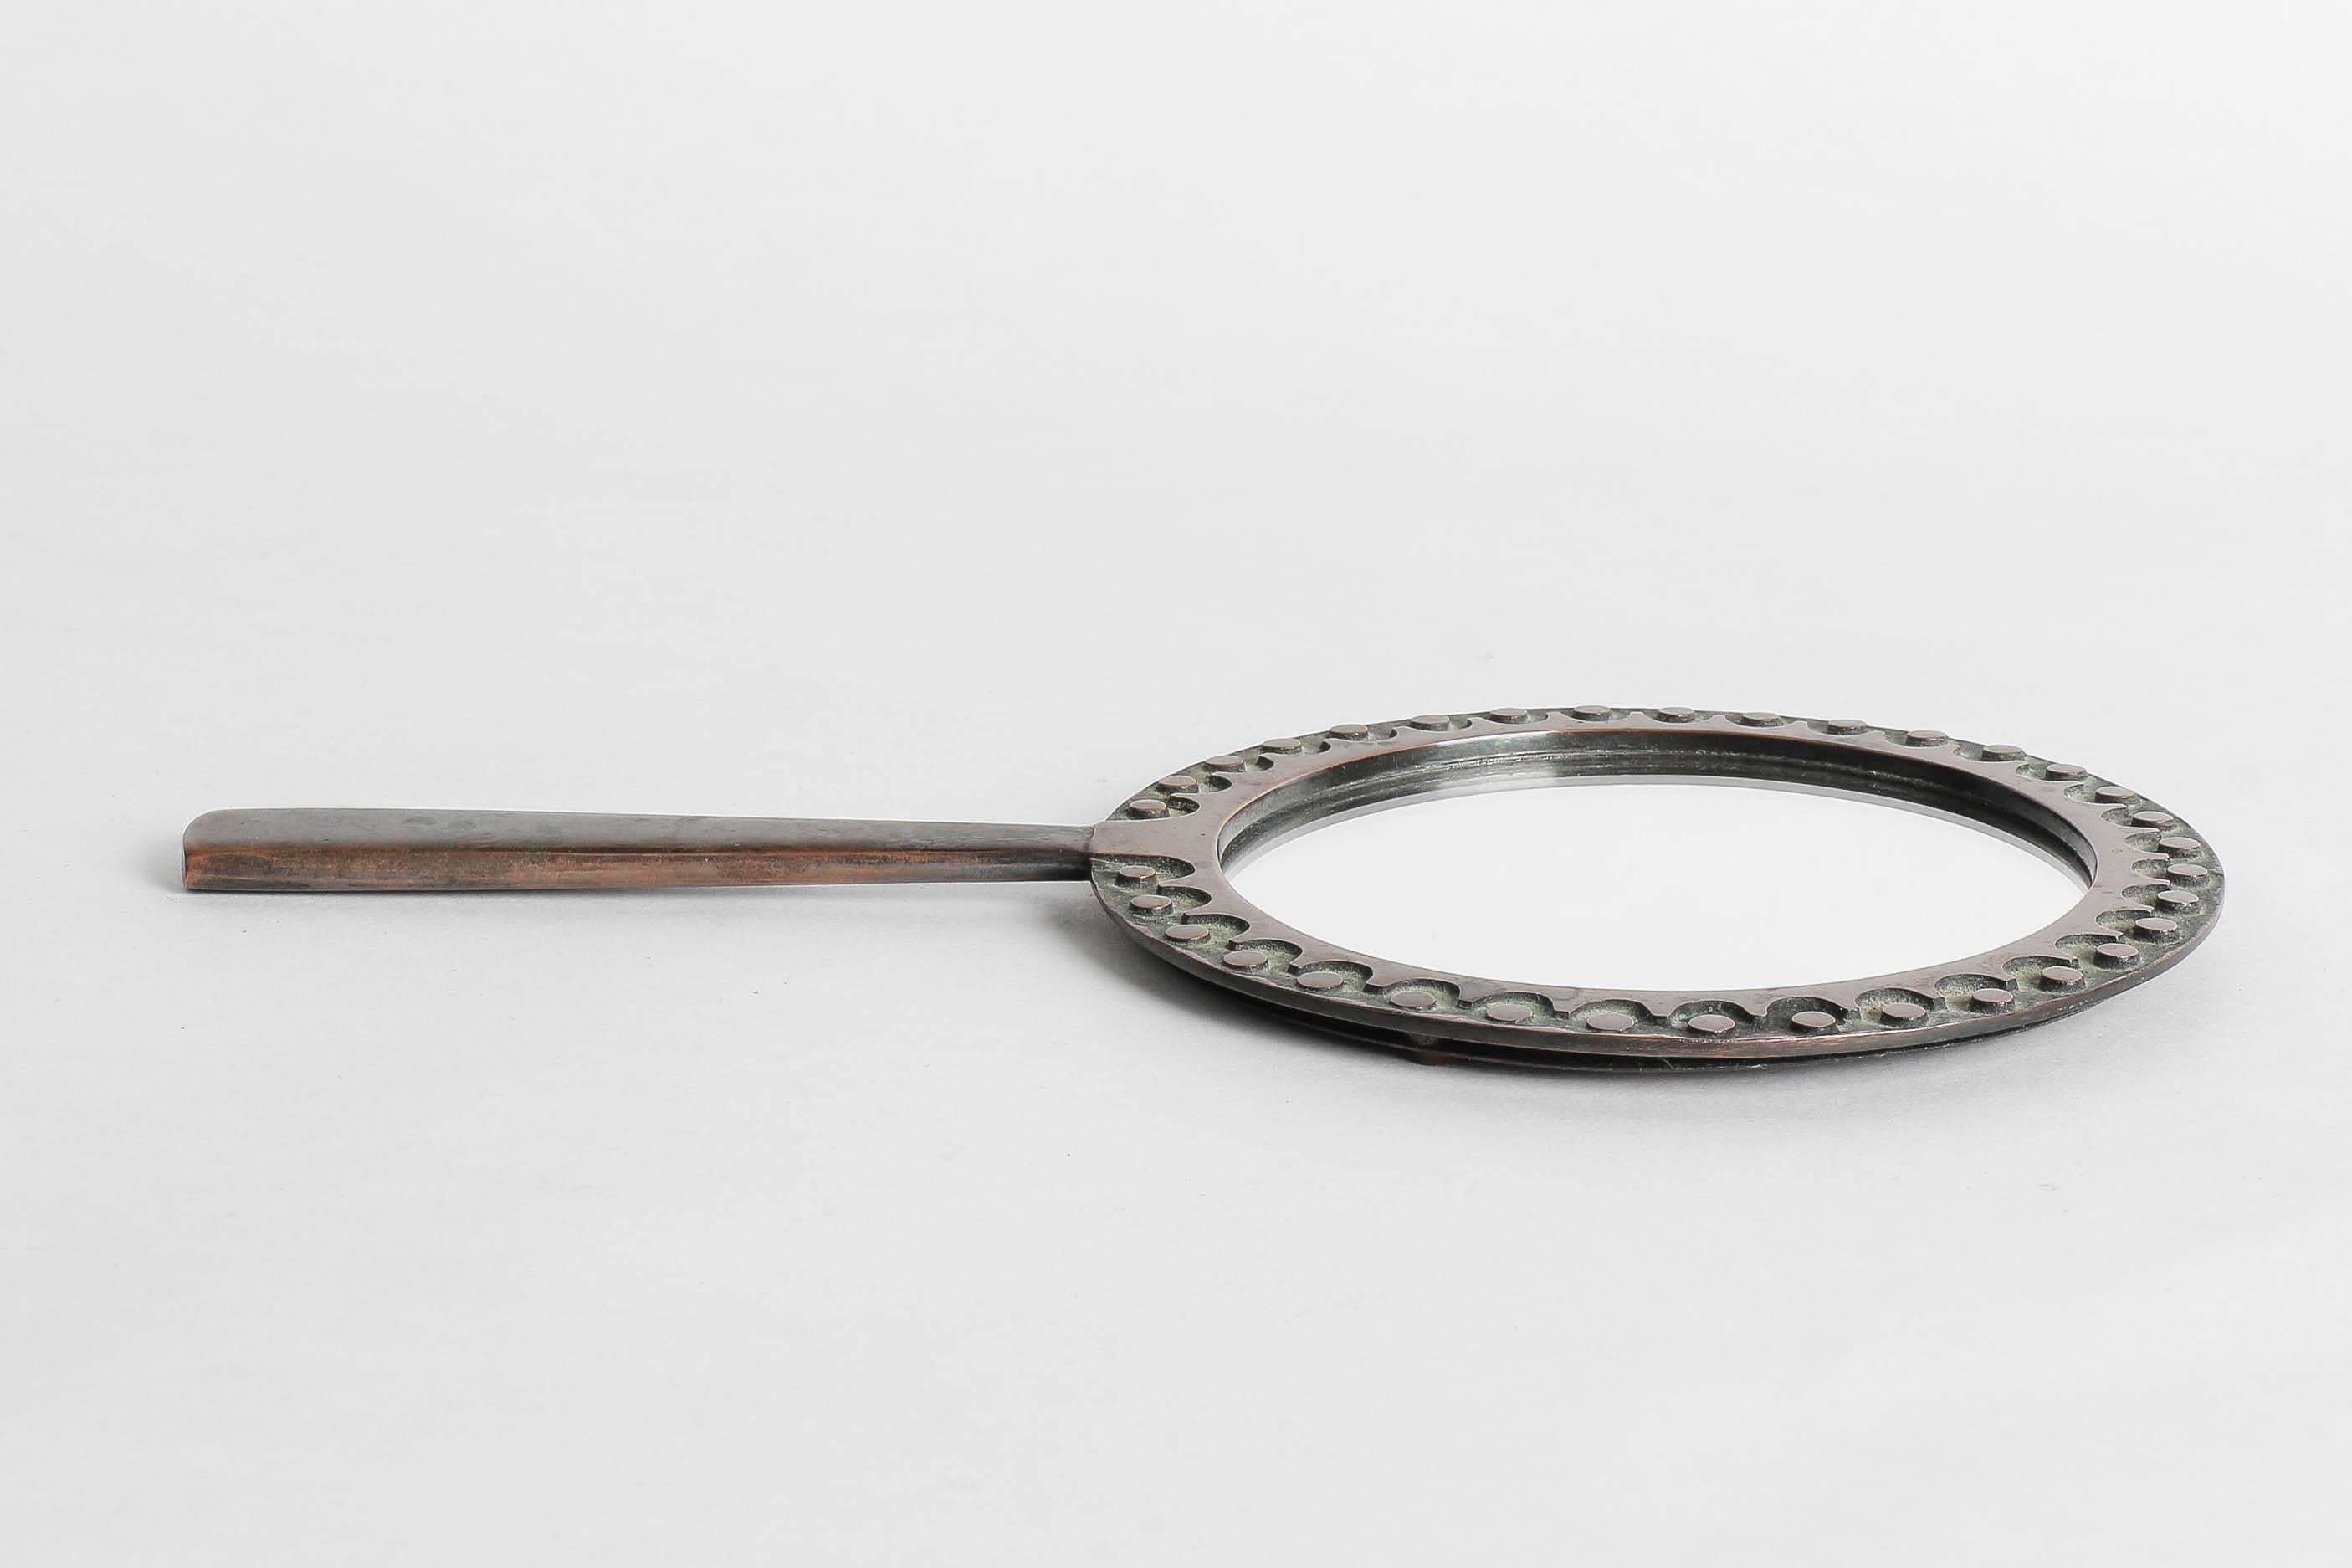 Hand-forged unique piece by the Hungarian sculptor Ottó Kopcsányi in the 1960s. Hand mirror made of bronze with a lovely pattern, hand-signed by the artist.